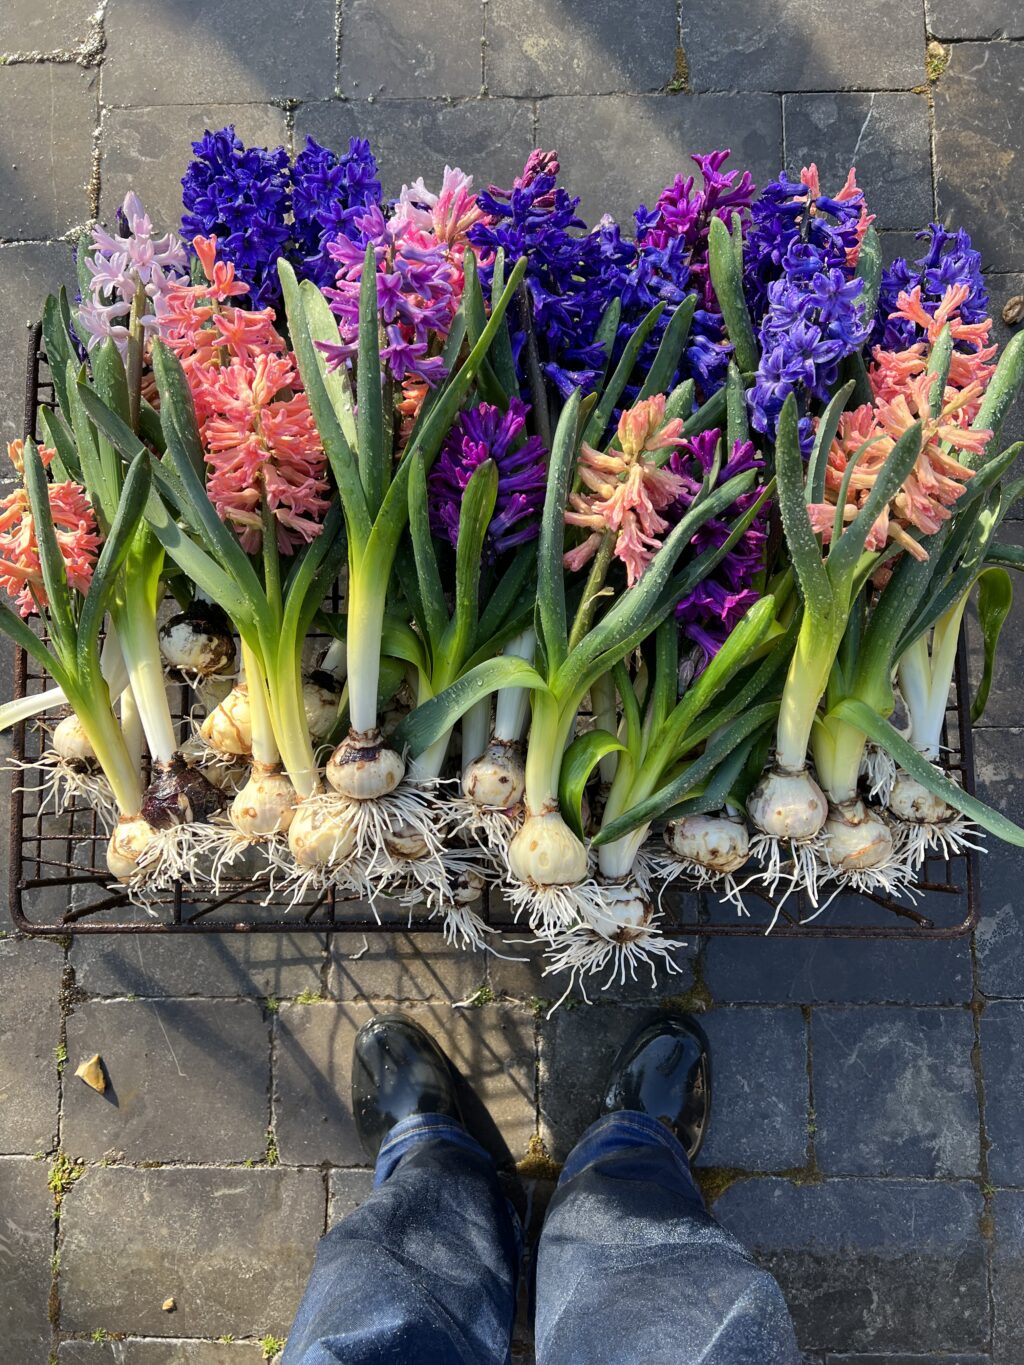 A row of brightly coloured hyacinth flowers, with bulbs attached, are lying on the ground near the photographer's feet.